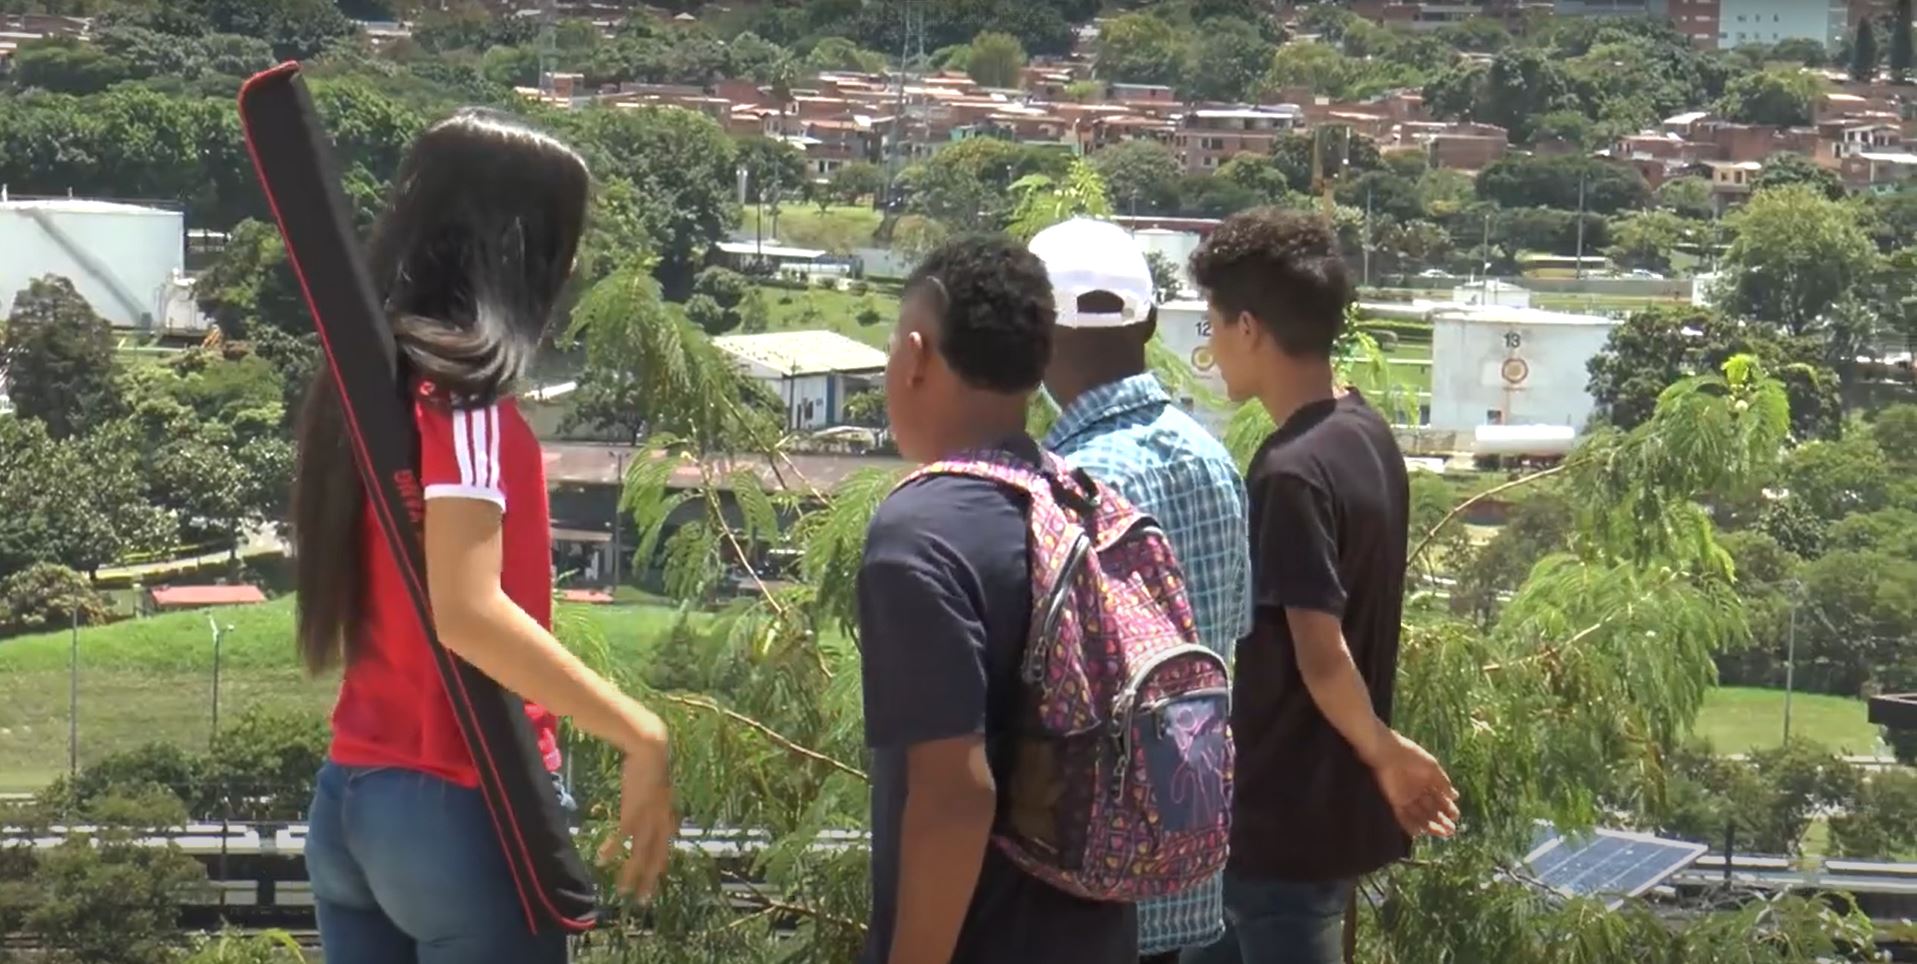 Film made by Afro-Colombian young people from the city of Medellin, Colombia.